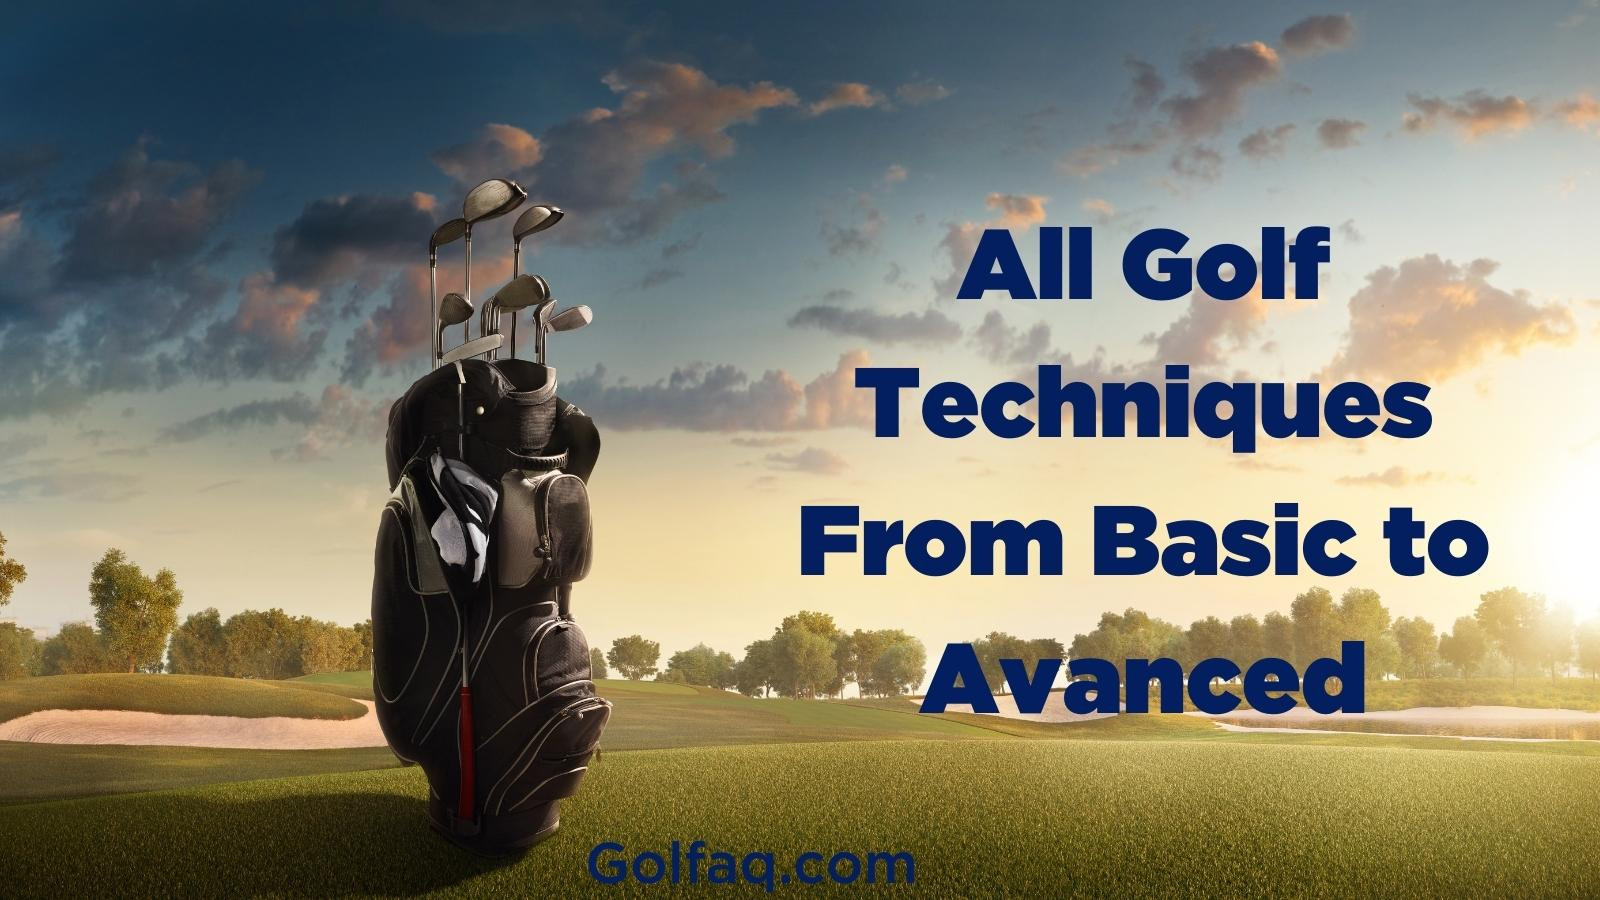 All Golf Techniques From Basic To Avanced